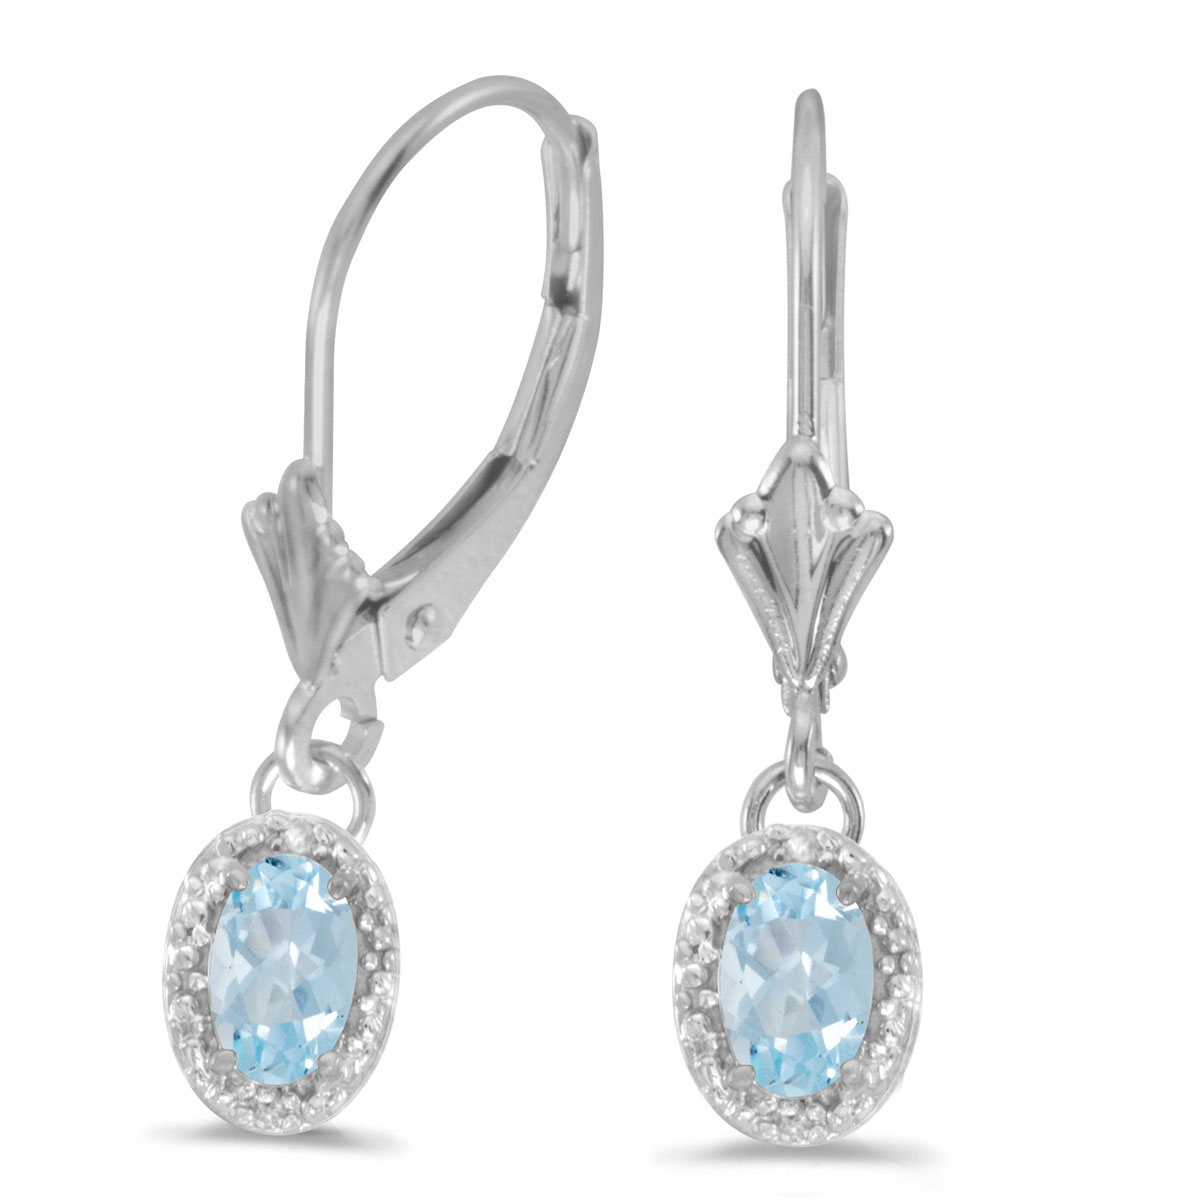 JCX2123: Beautiful 10k white gold leverback earrings with stunning 6x4 mm aquamarines complemented with bright diamonds.